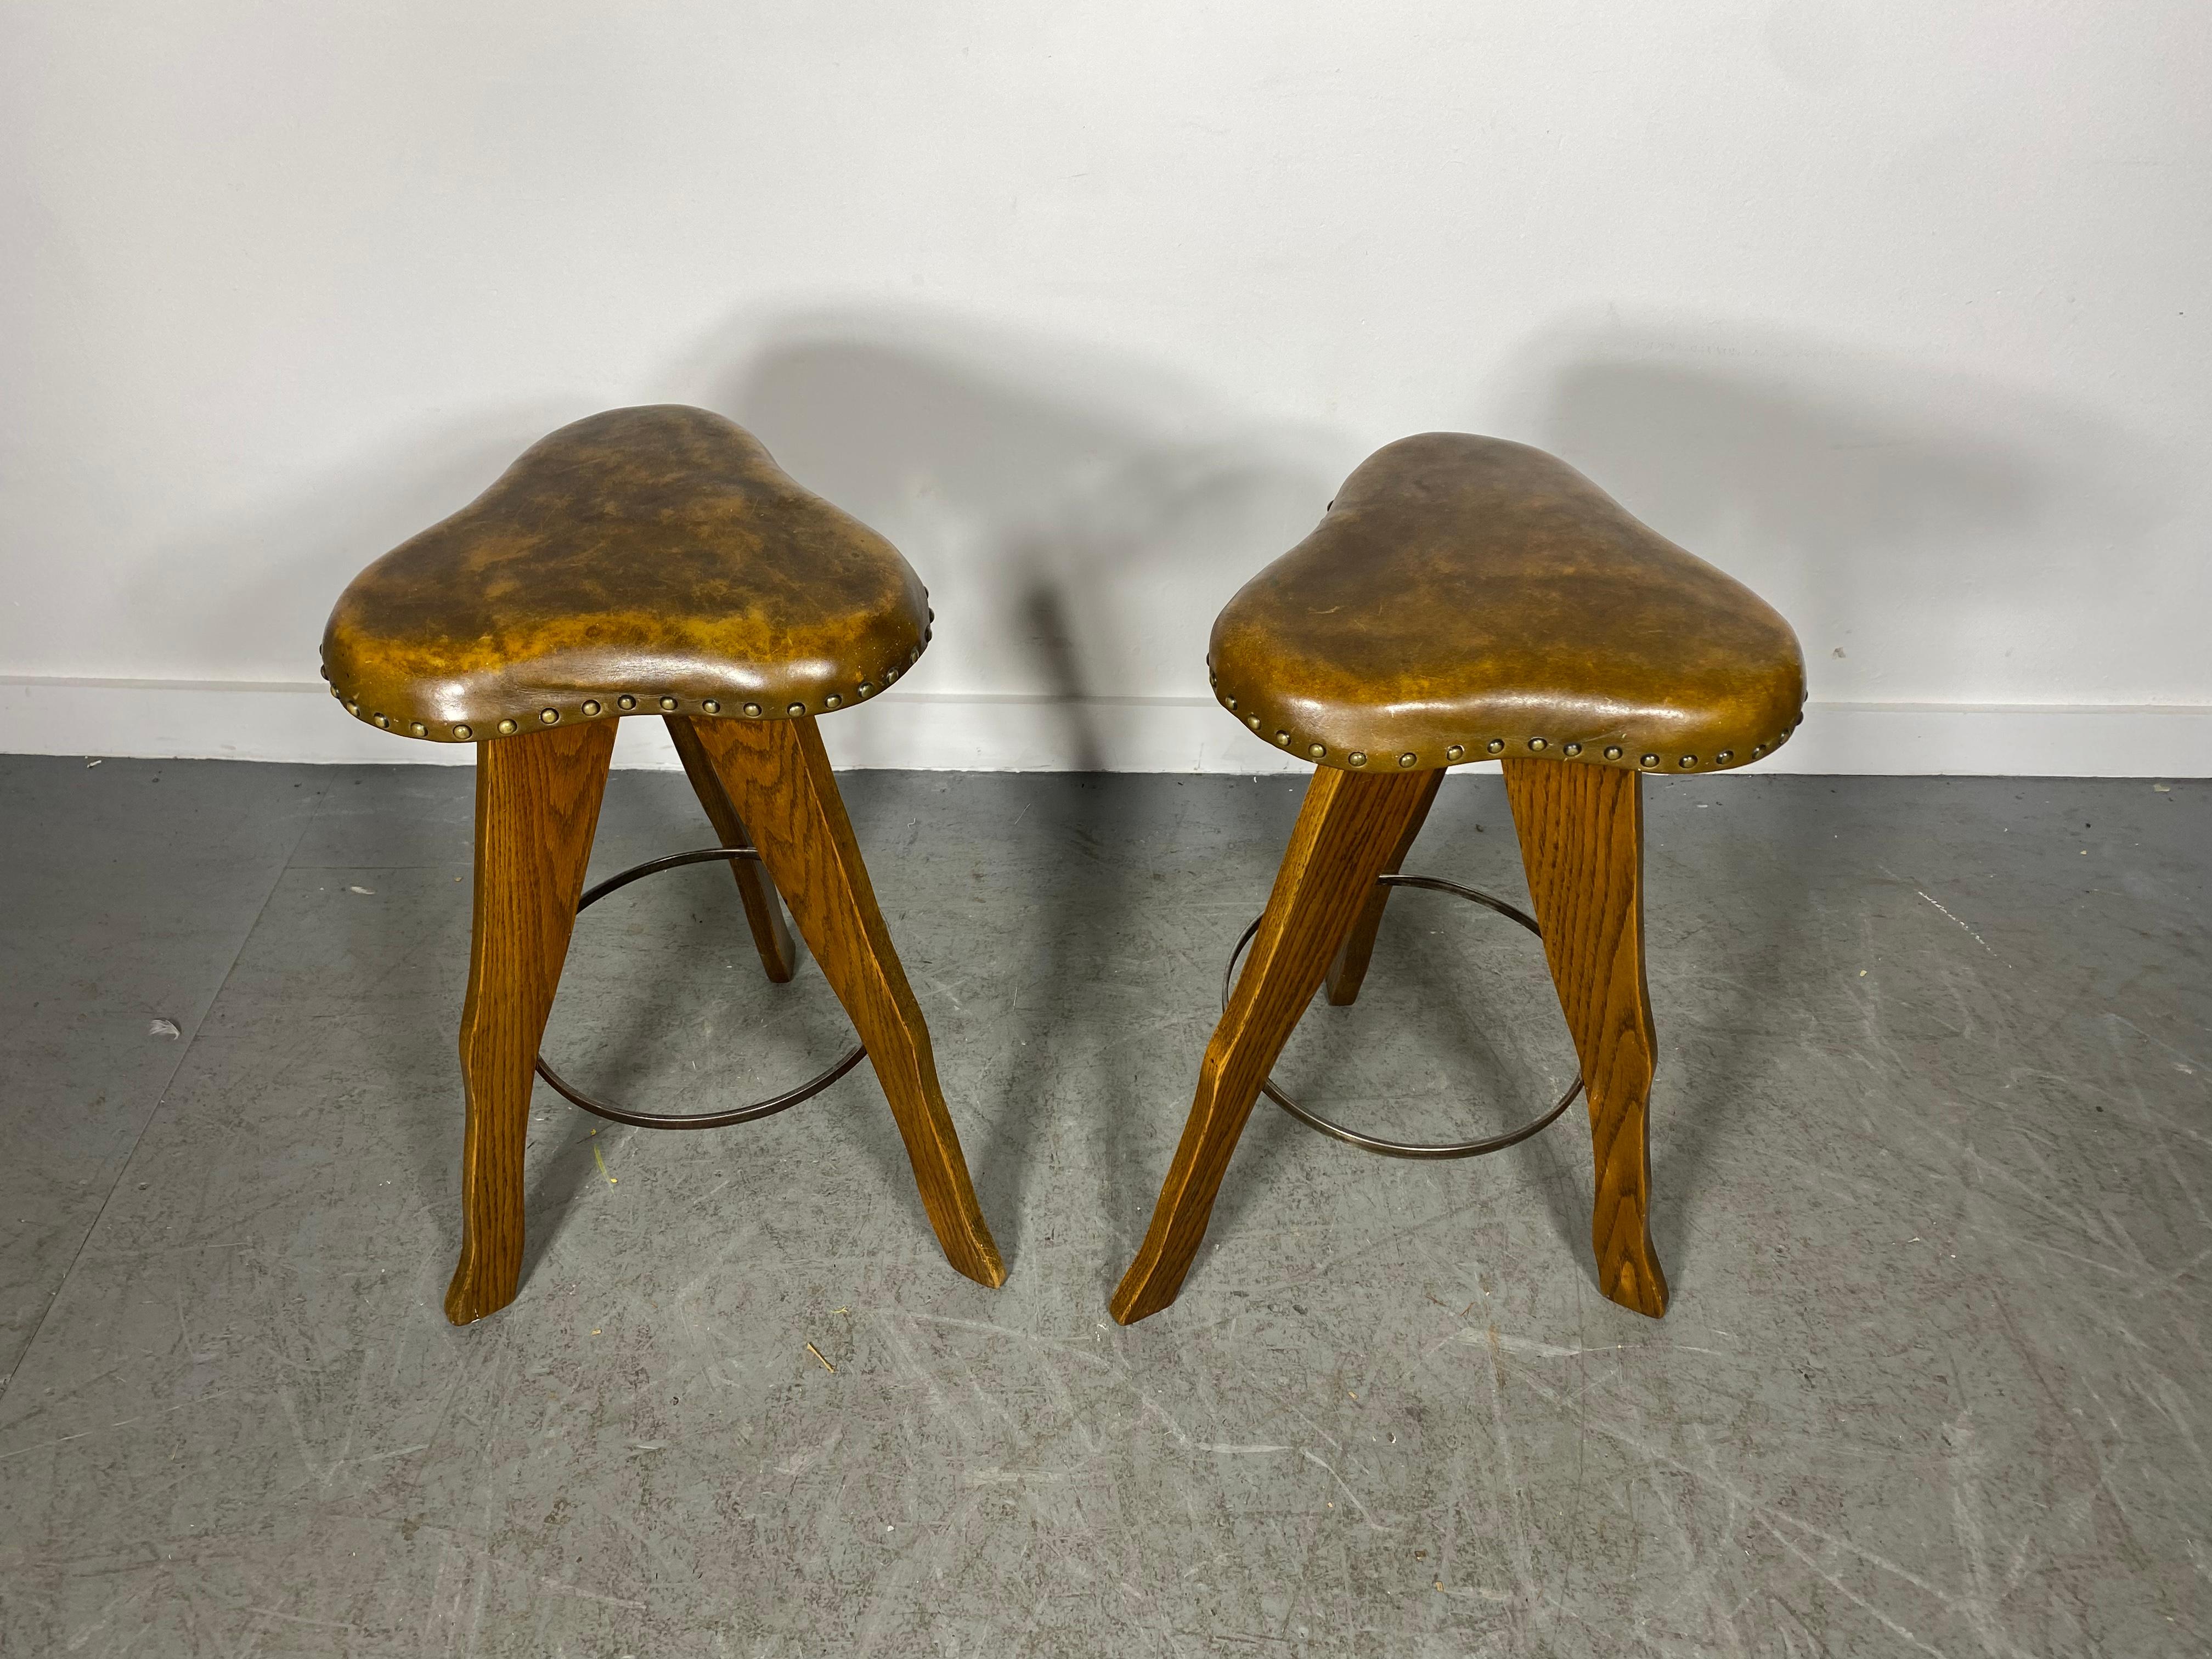 Unusual Rustic / Modern Farmhouse Oak and Leather Stools, Clover Shape Tops For Sale 3